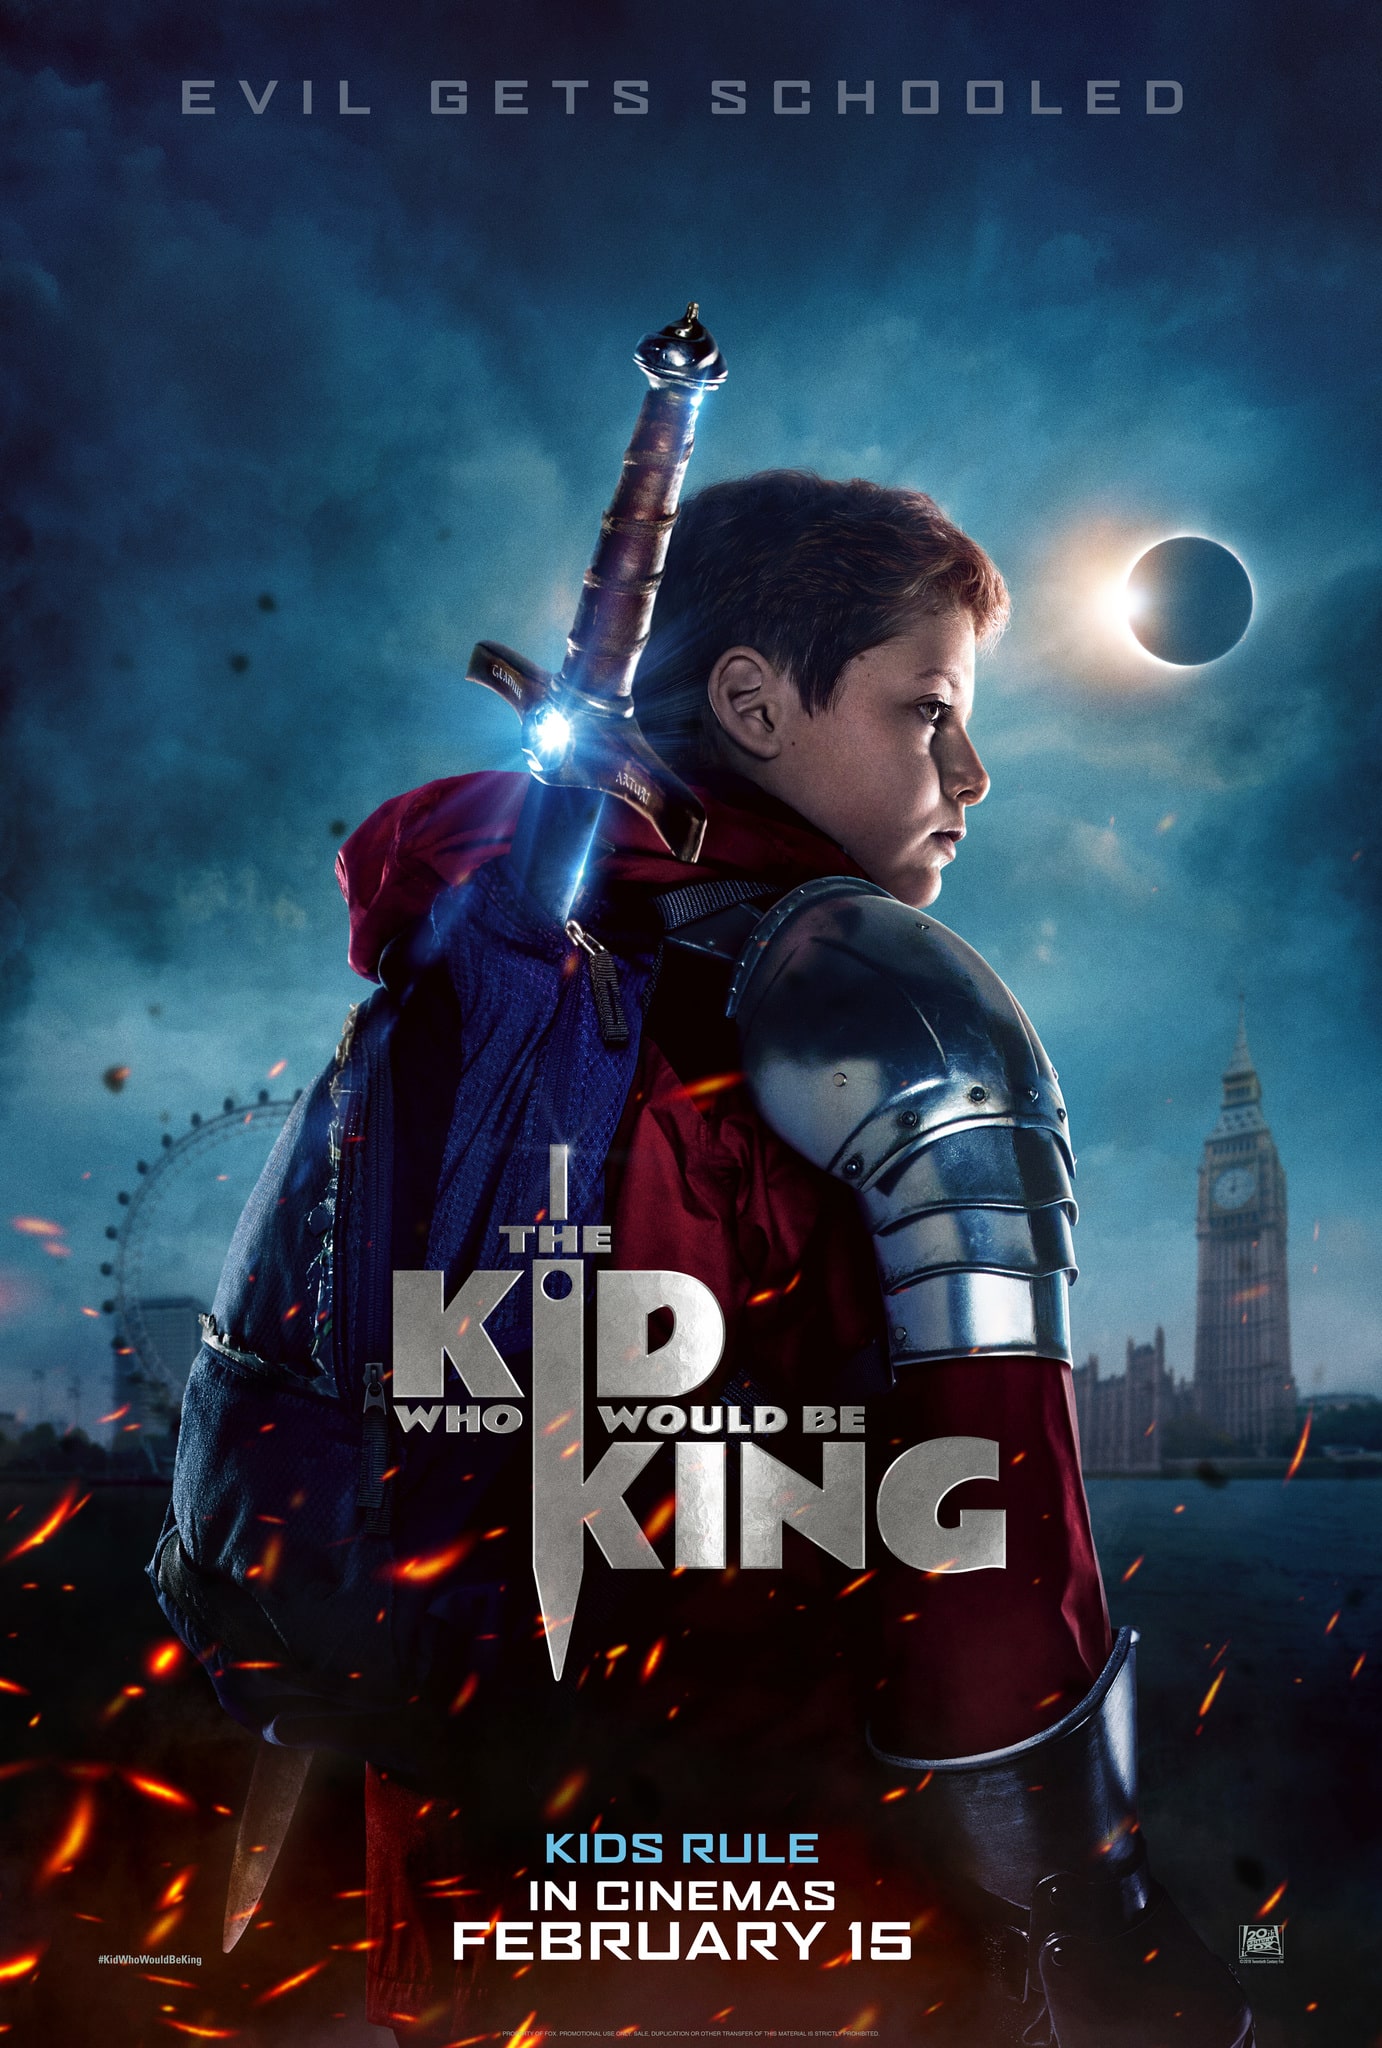 The Kid Who Would Be King Download movies 2021 Free new movies